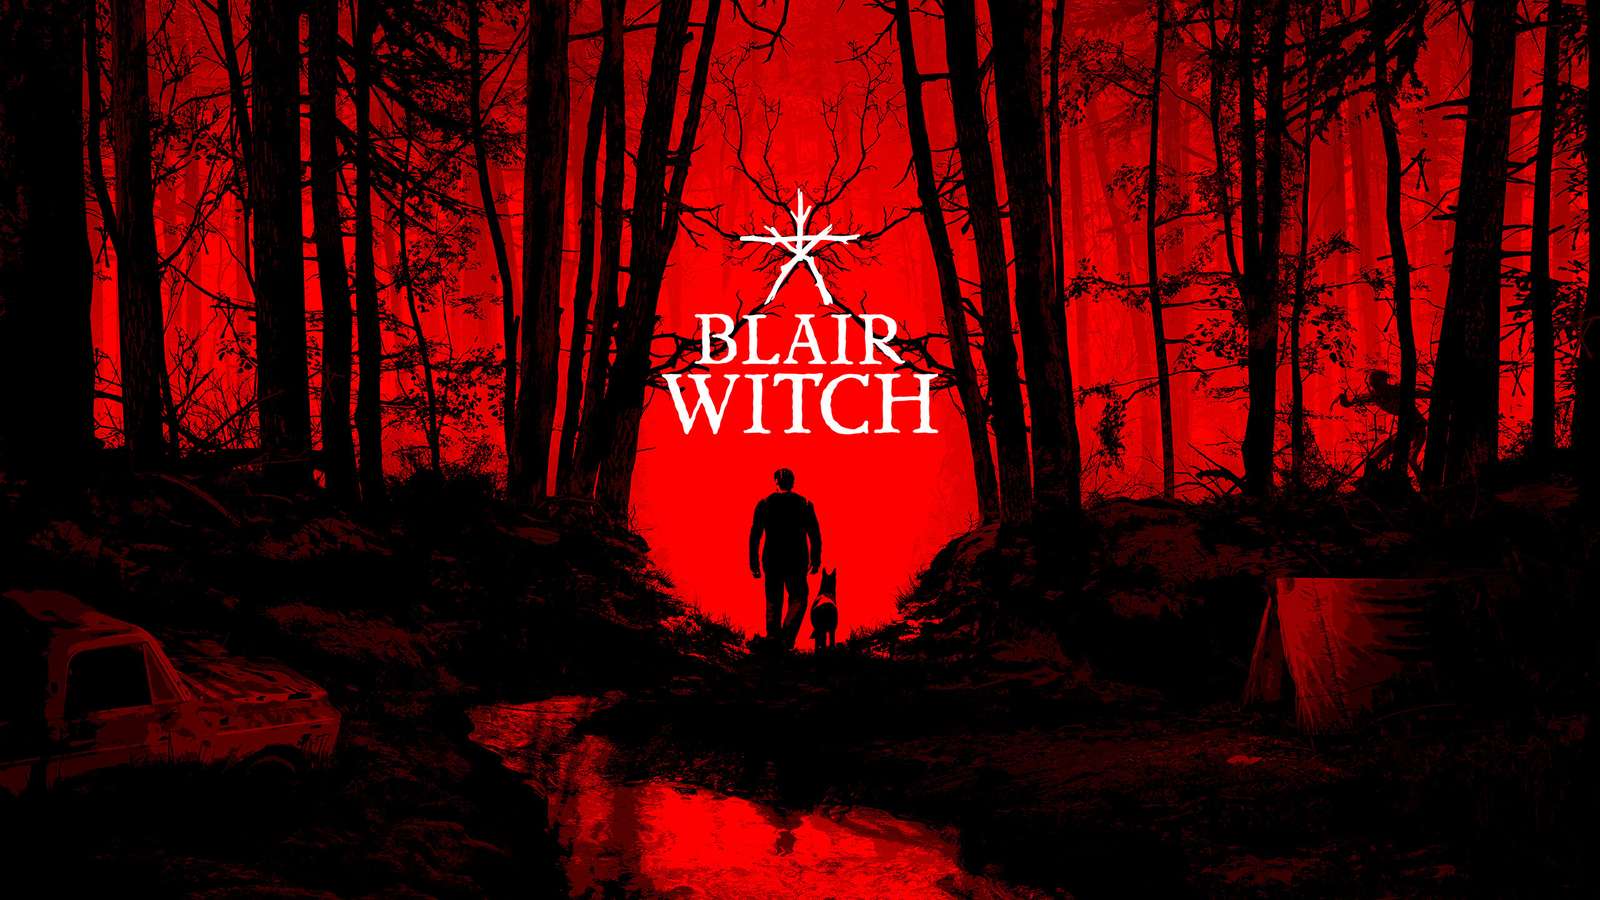 Blair Witch online puzzle